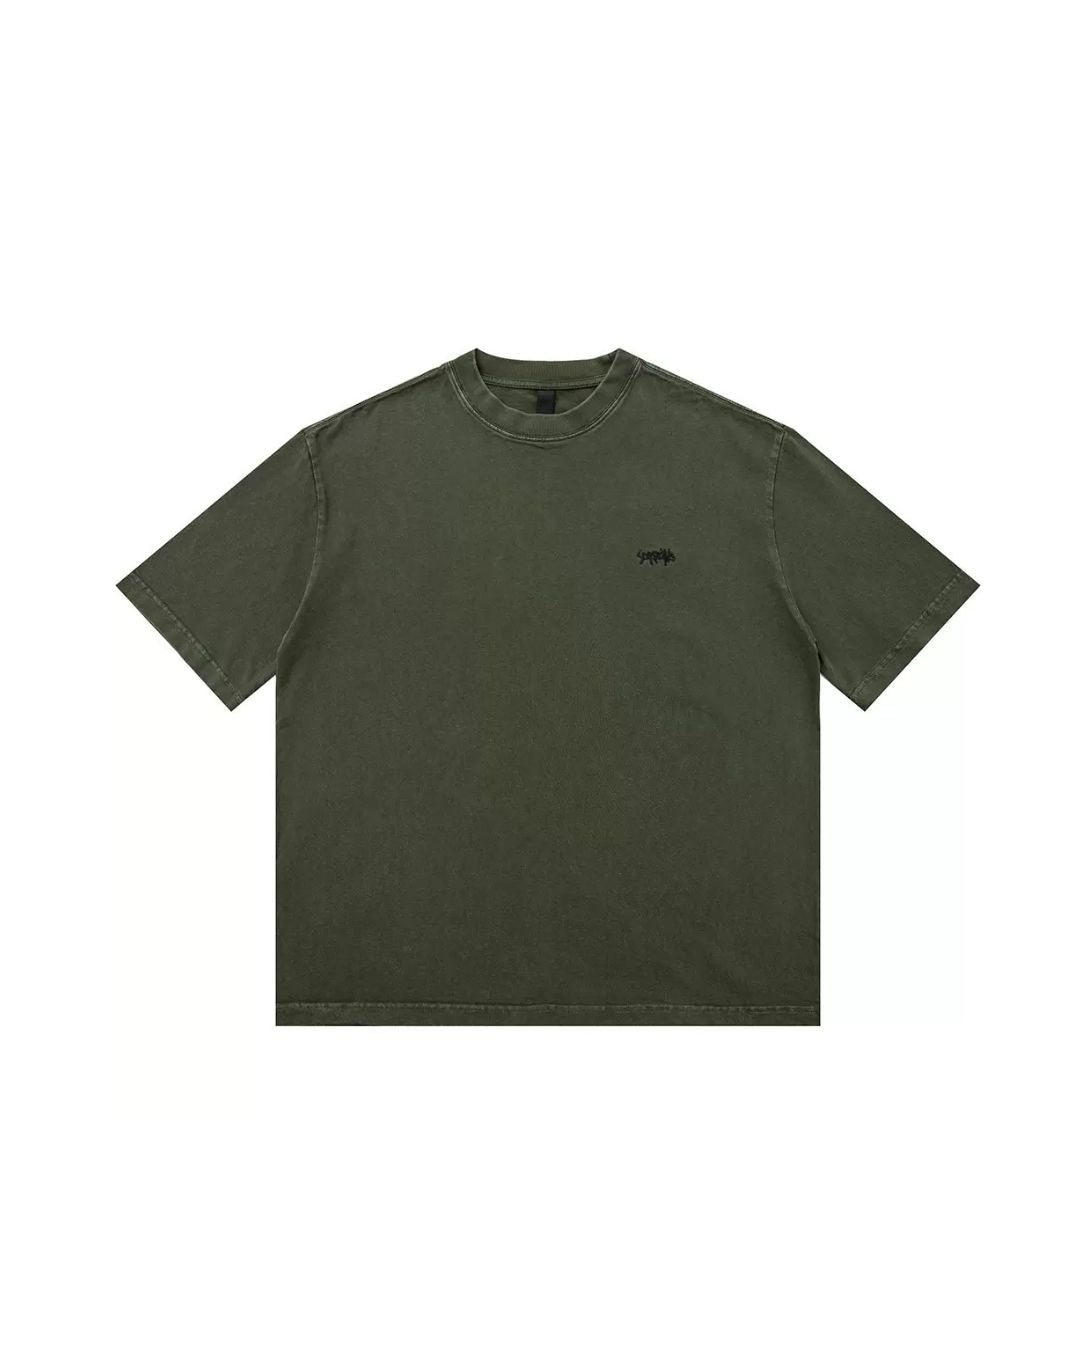 Washed Color One Point T-shirt　ST122